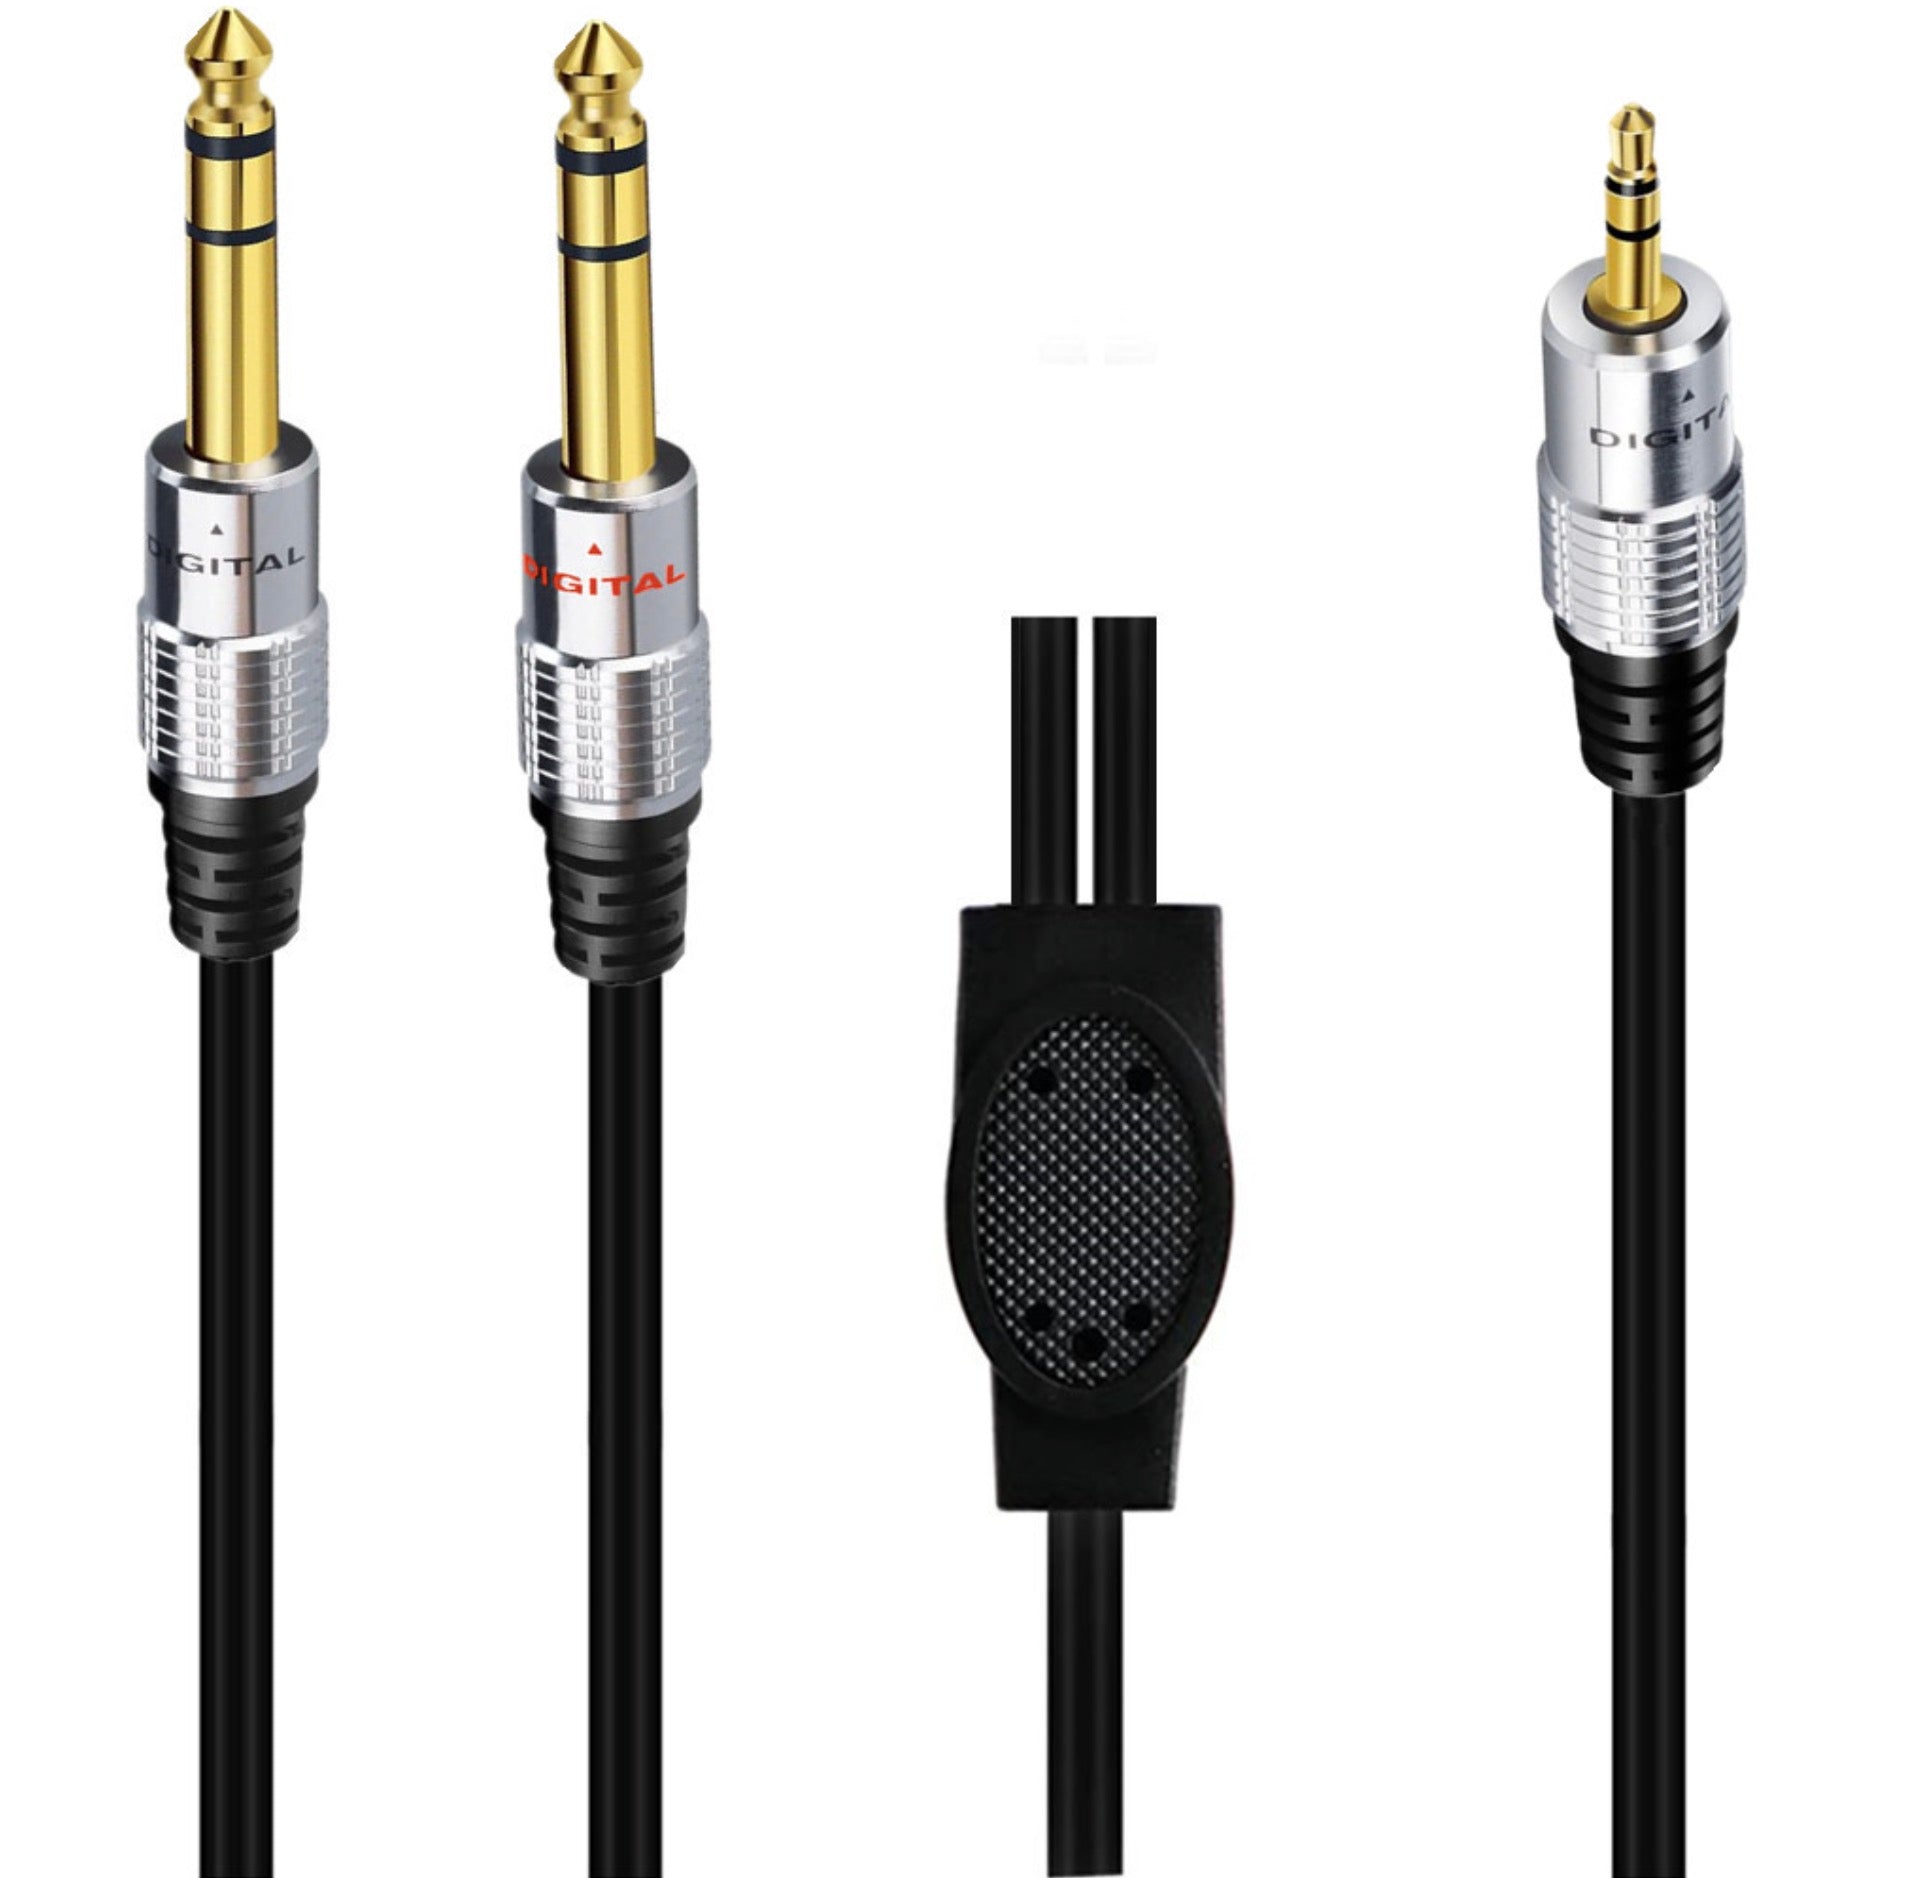 3.5mm 1/4" inch Male to Dual 6.35mm Male Stereo Headphone Guitar Extension Cable 0.5m